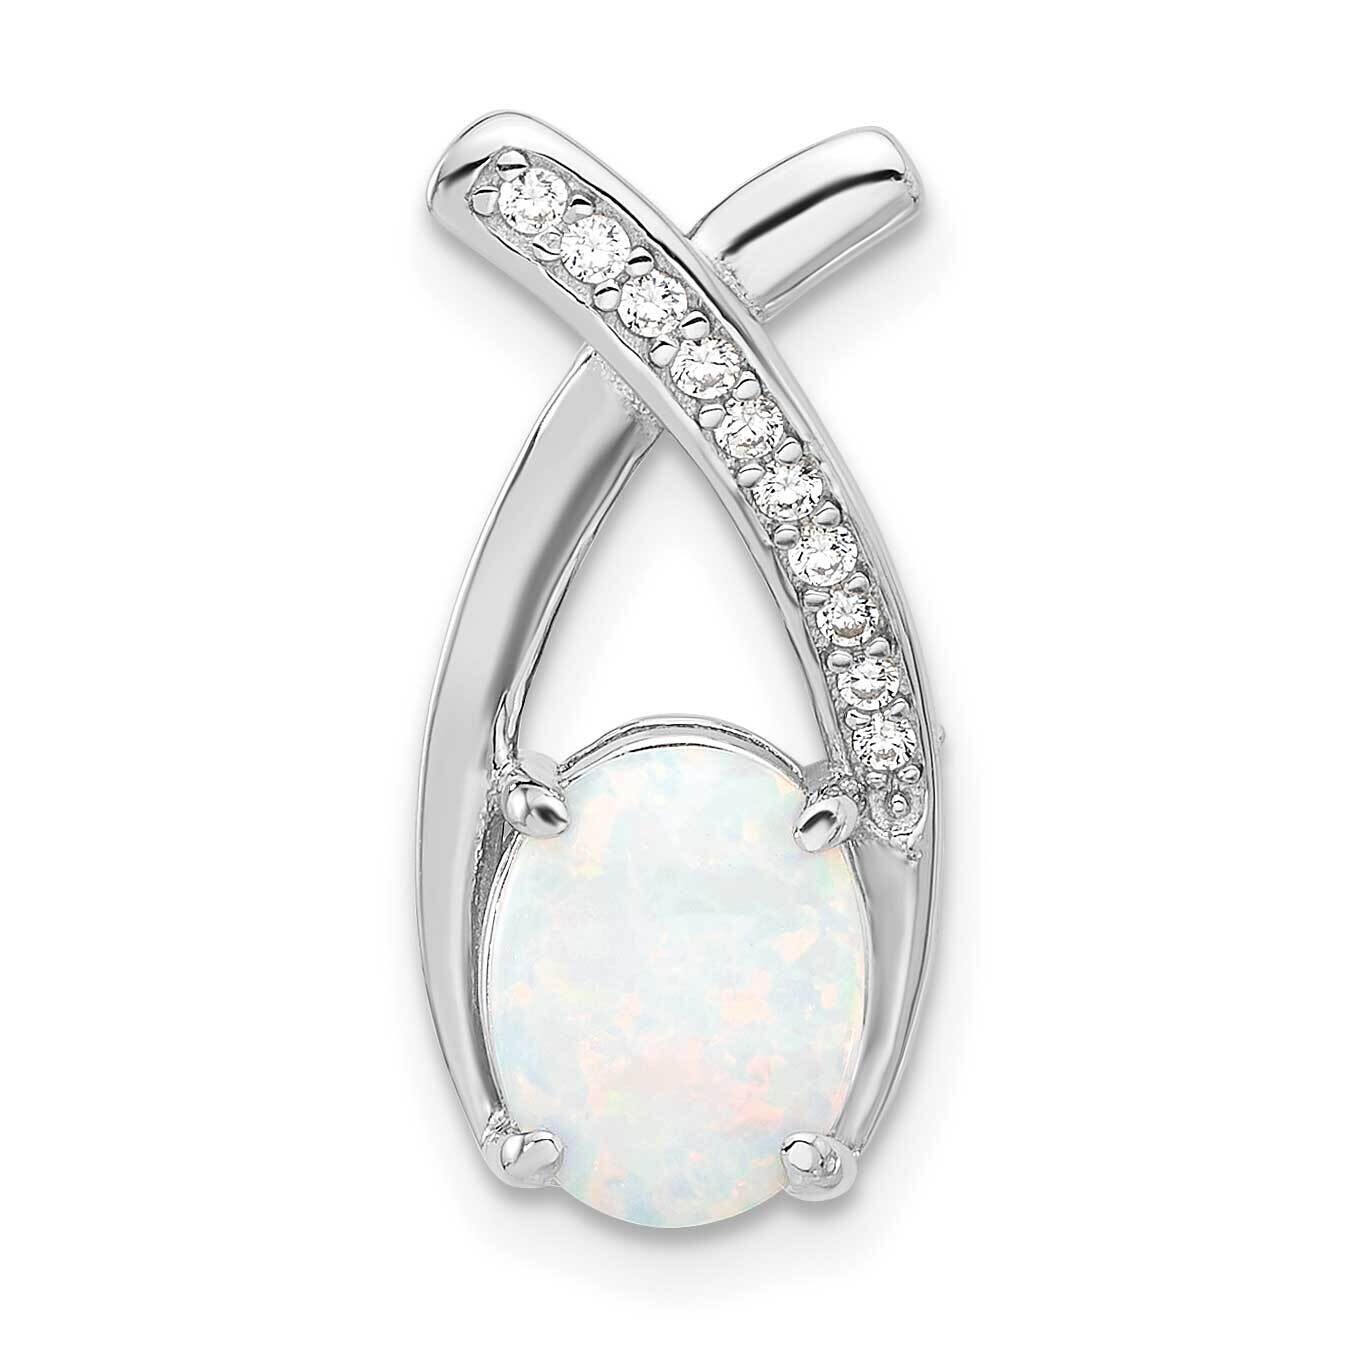 Rh-Plated CZ White Created Opal Chain Slide Pendant Sterling Silver QP5763